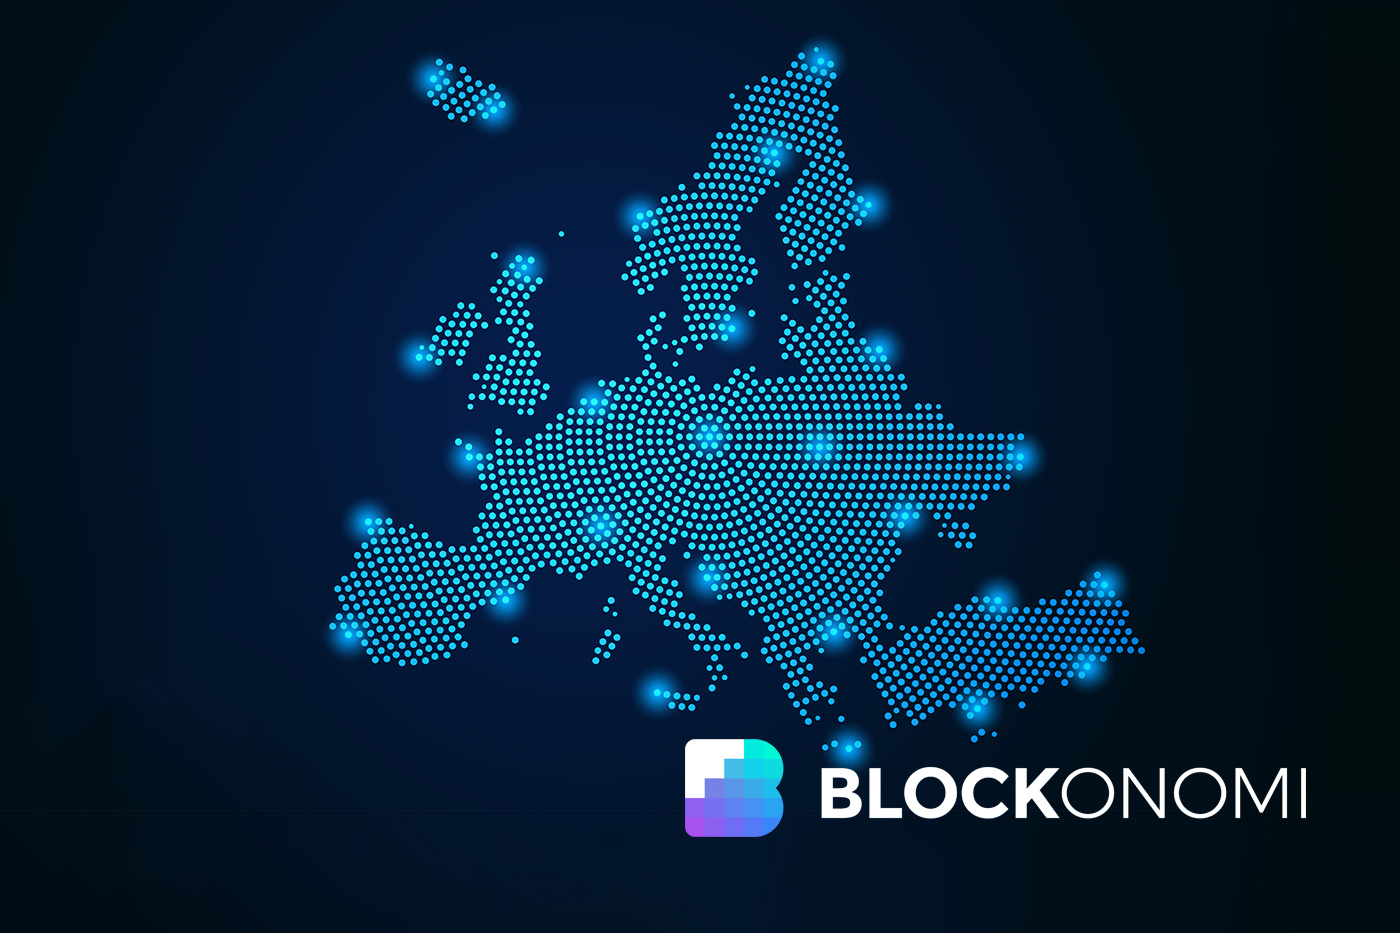 European Commission Looking at Crypto and Blockchain Regulations